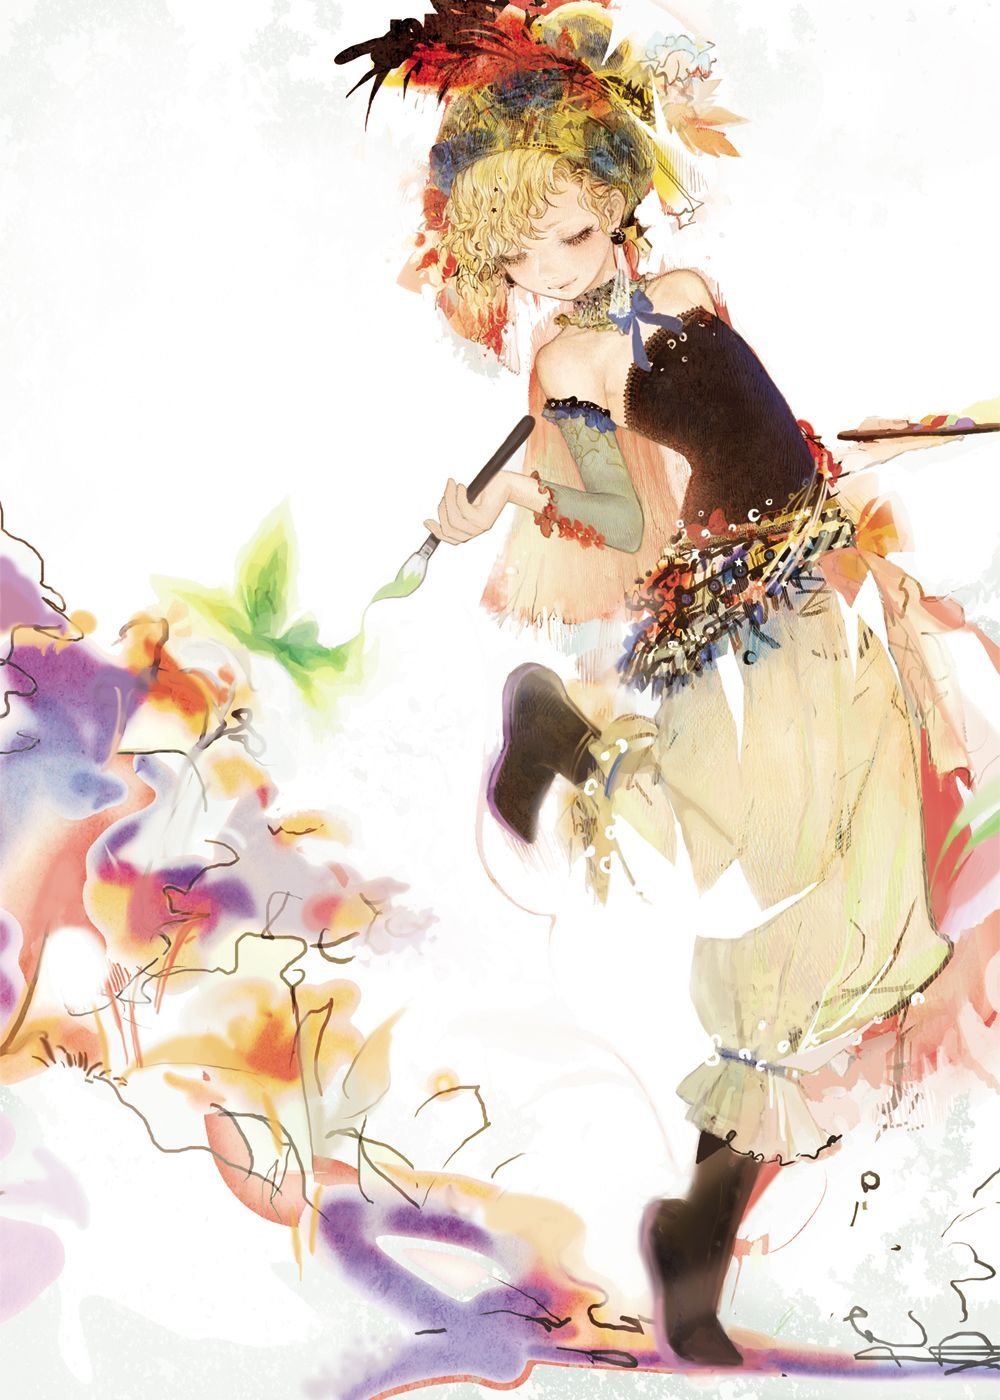 Relm's pretty much the most useless character in FFVI, but is this a beautiful drawing or what. Can't. Final